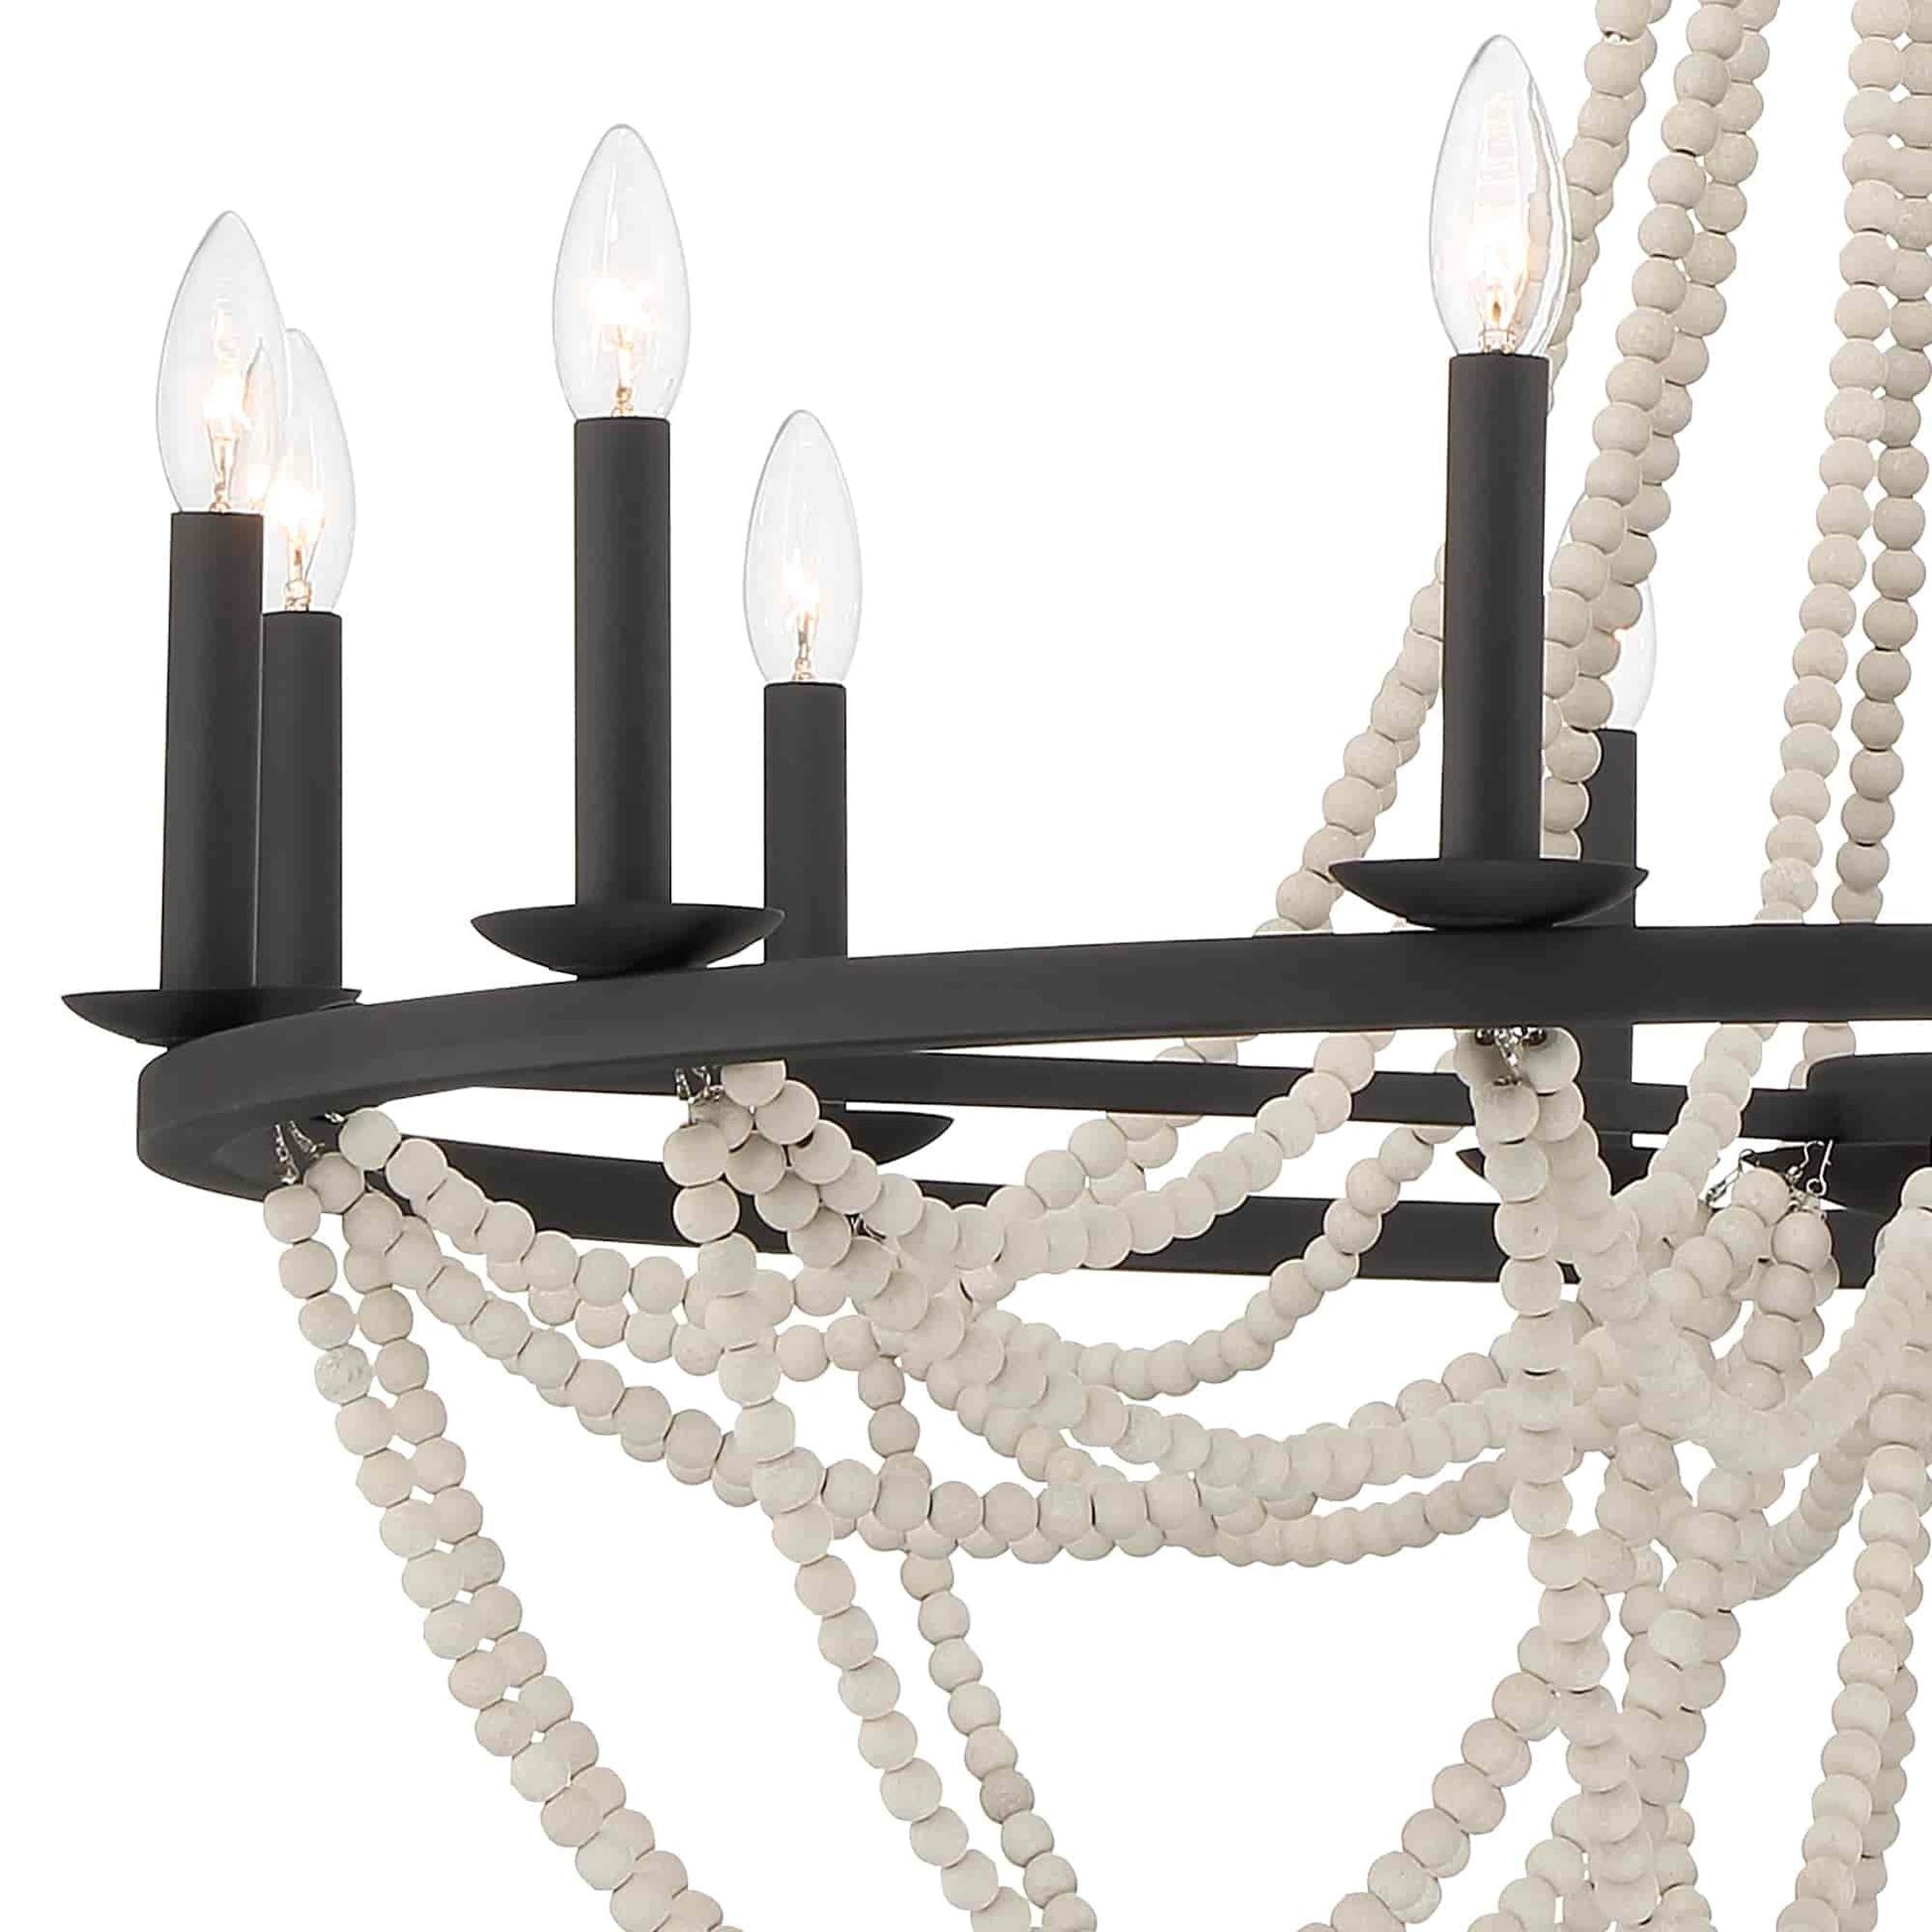 12 light candle style wagon wheel wood beaded chandelier (9) by ACROMA